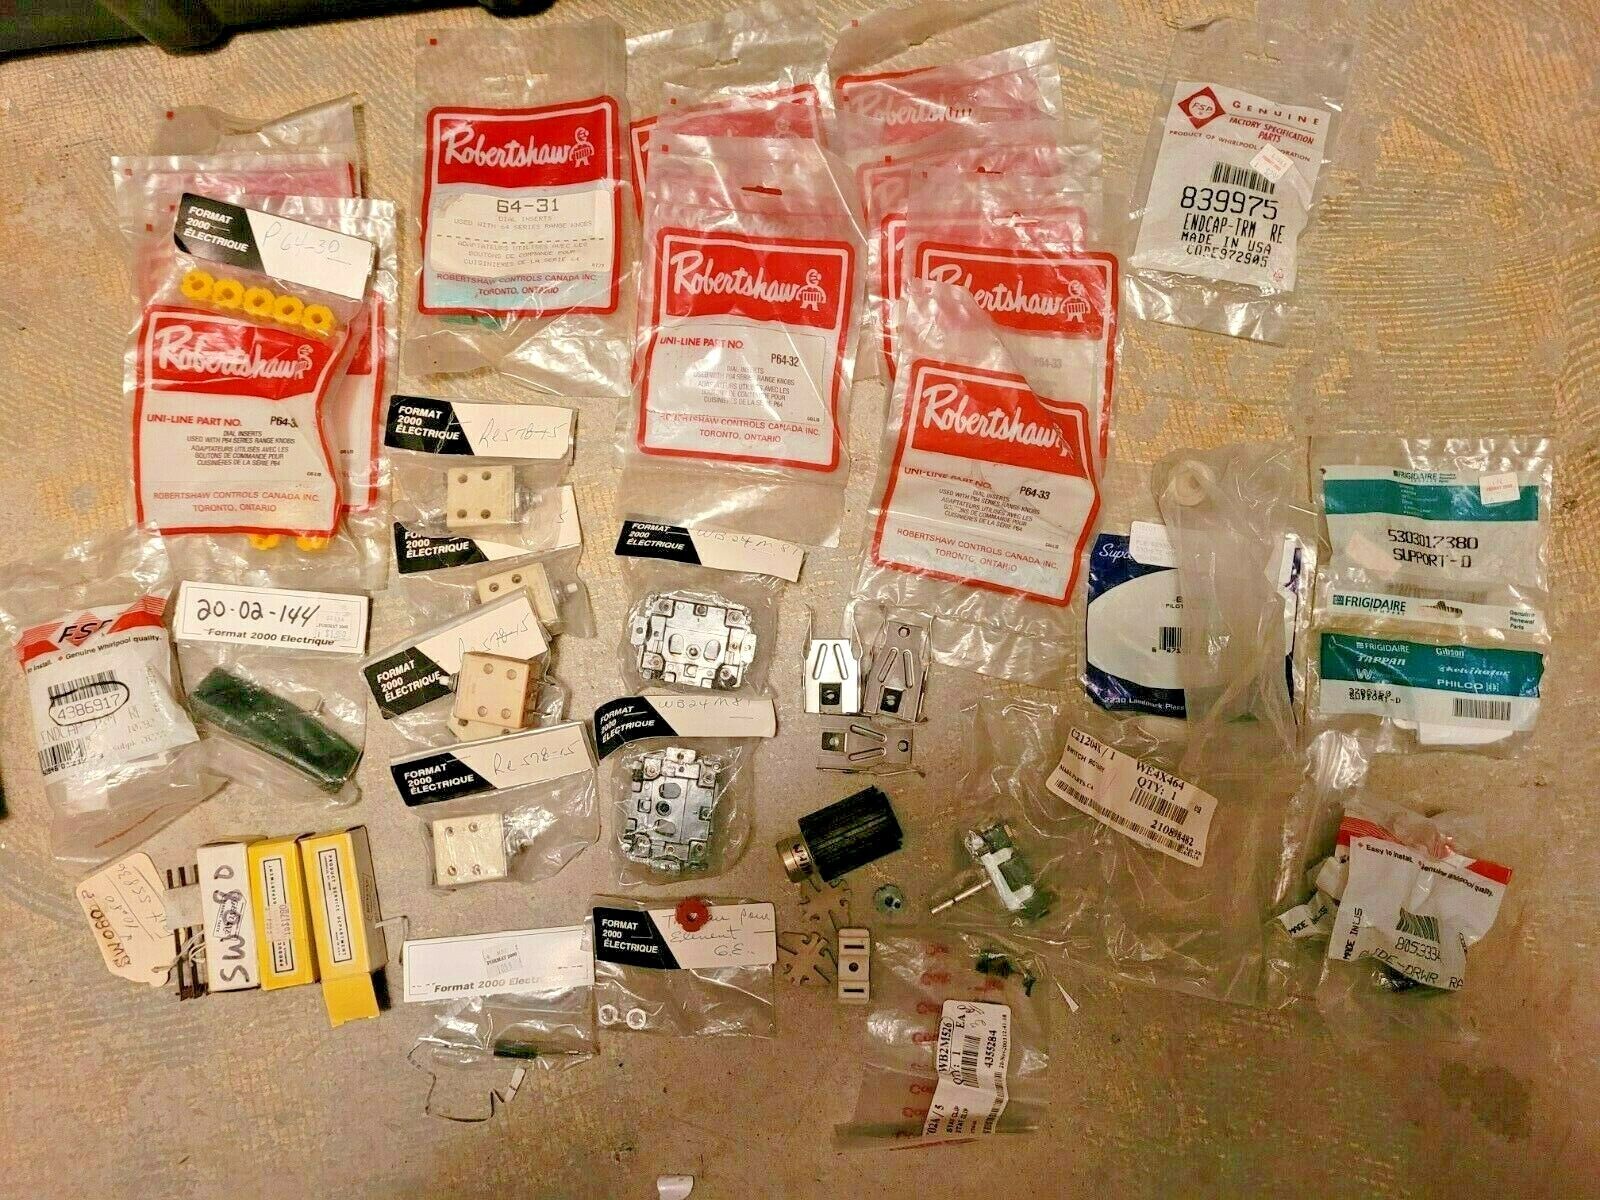 LOT of Robertshaw Dial Inserts and various APPLIANCE parts NEW Без бренда